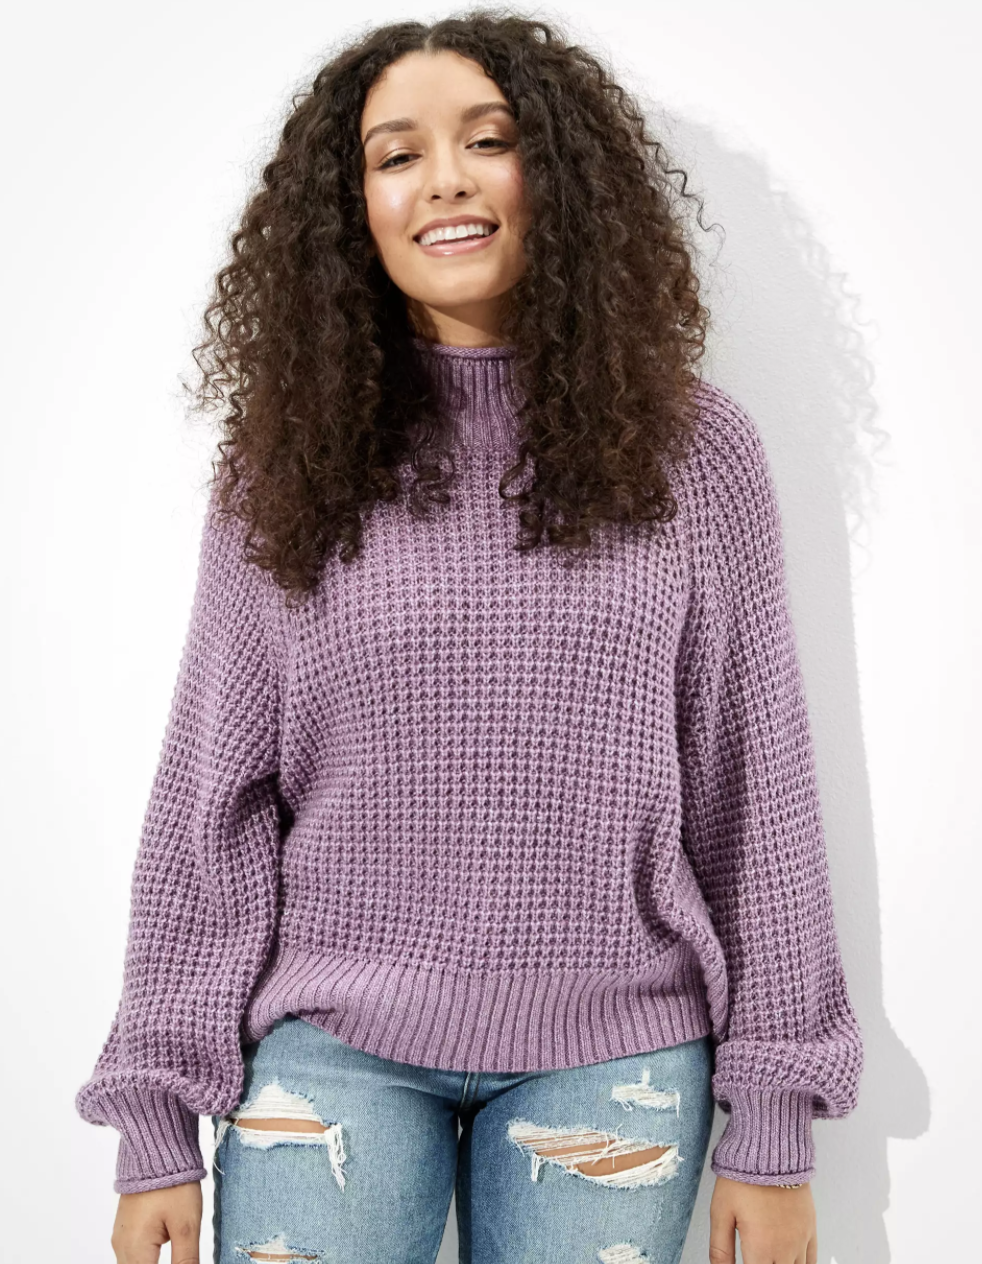 A model wearing the sweater in lilac